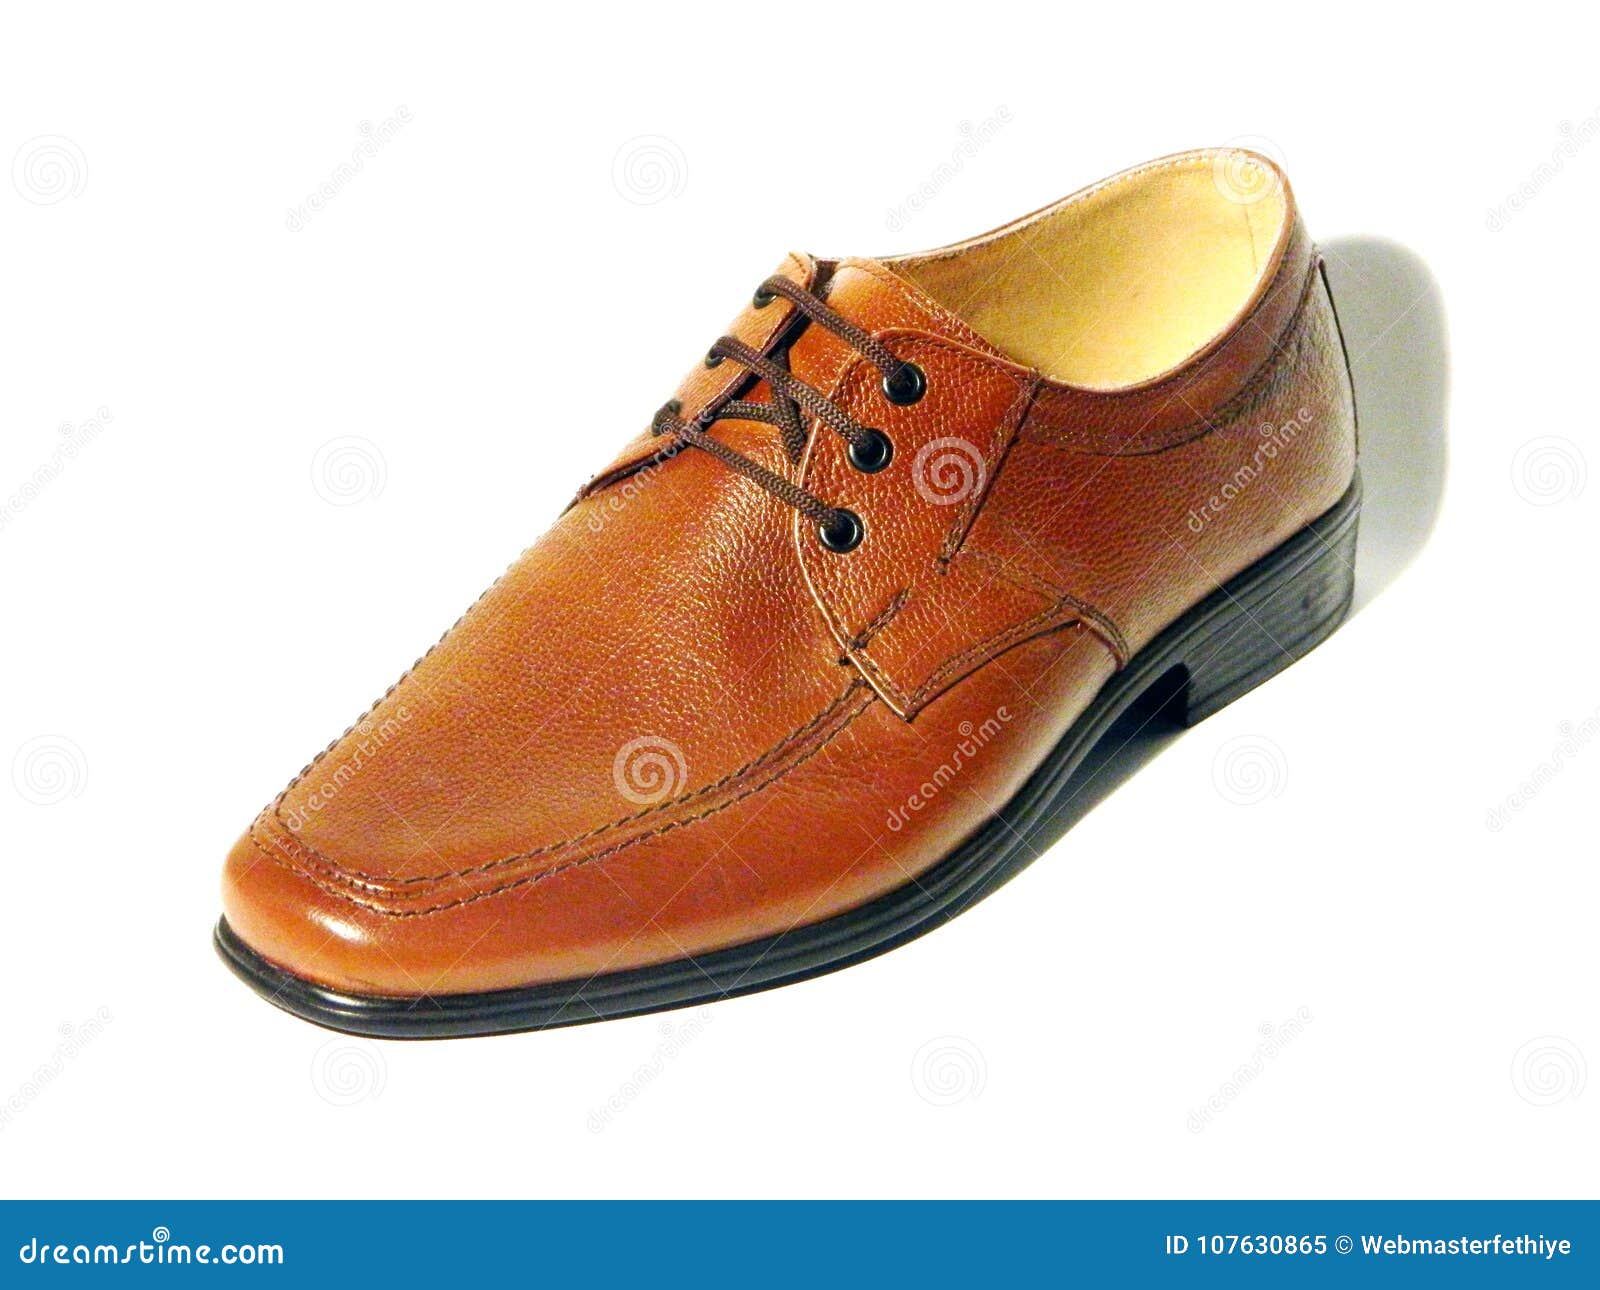 Formal shoes for men brown stock image. Image of pair - 107630865